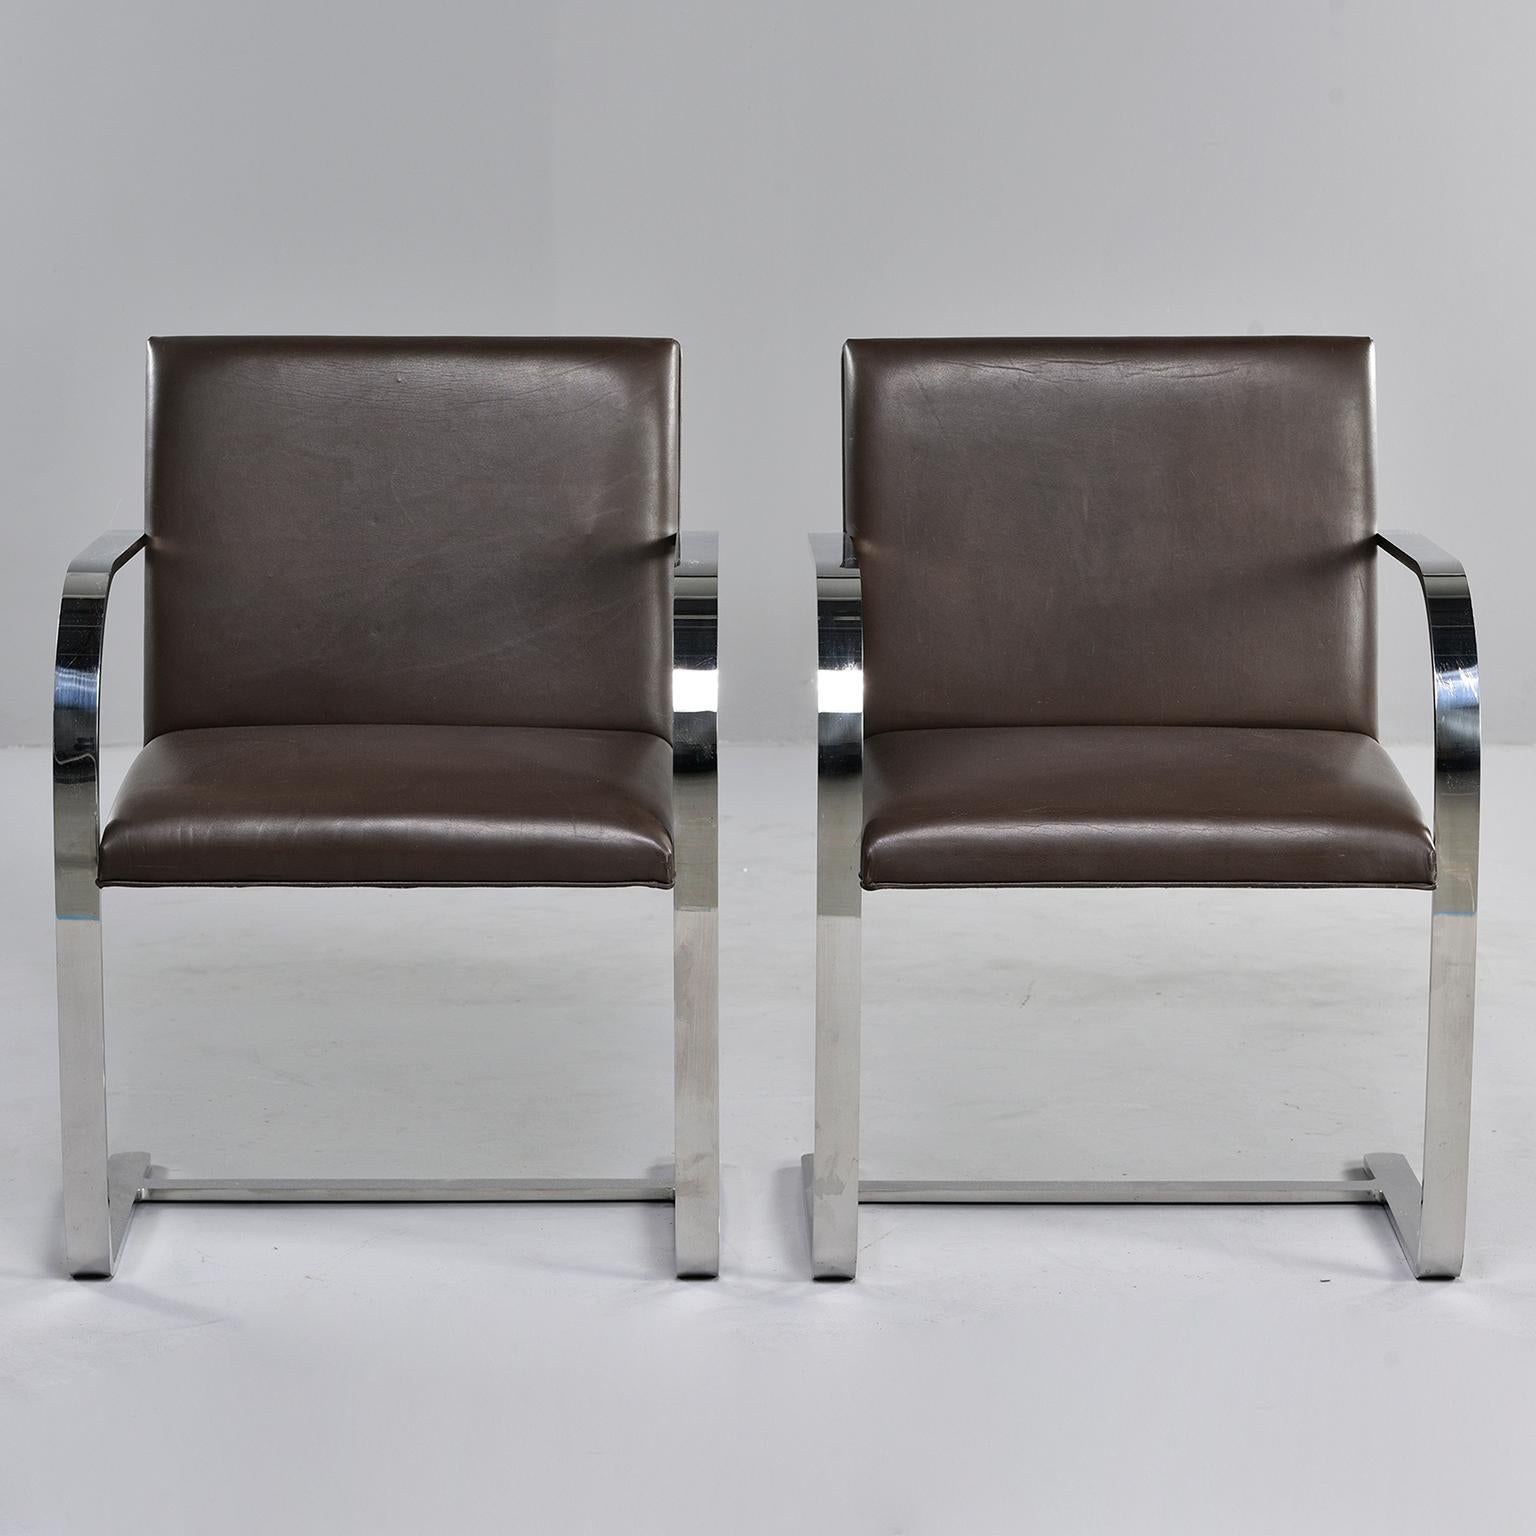 This pair of genuine Knoll Brno chairs is upholstered in dark brown leather. Designed by Mies van der Rohe in 1930 and still in current production by Knoll, these chairs with leather upholstery currently retail for $2630 each.
 